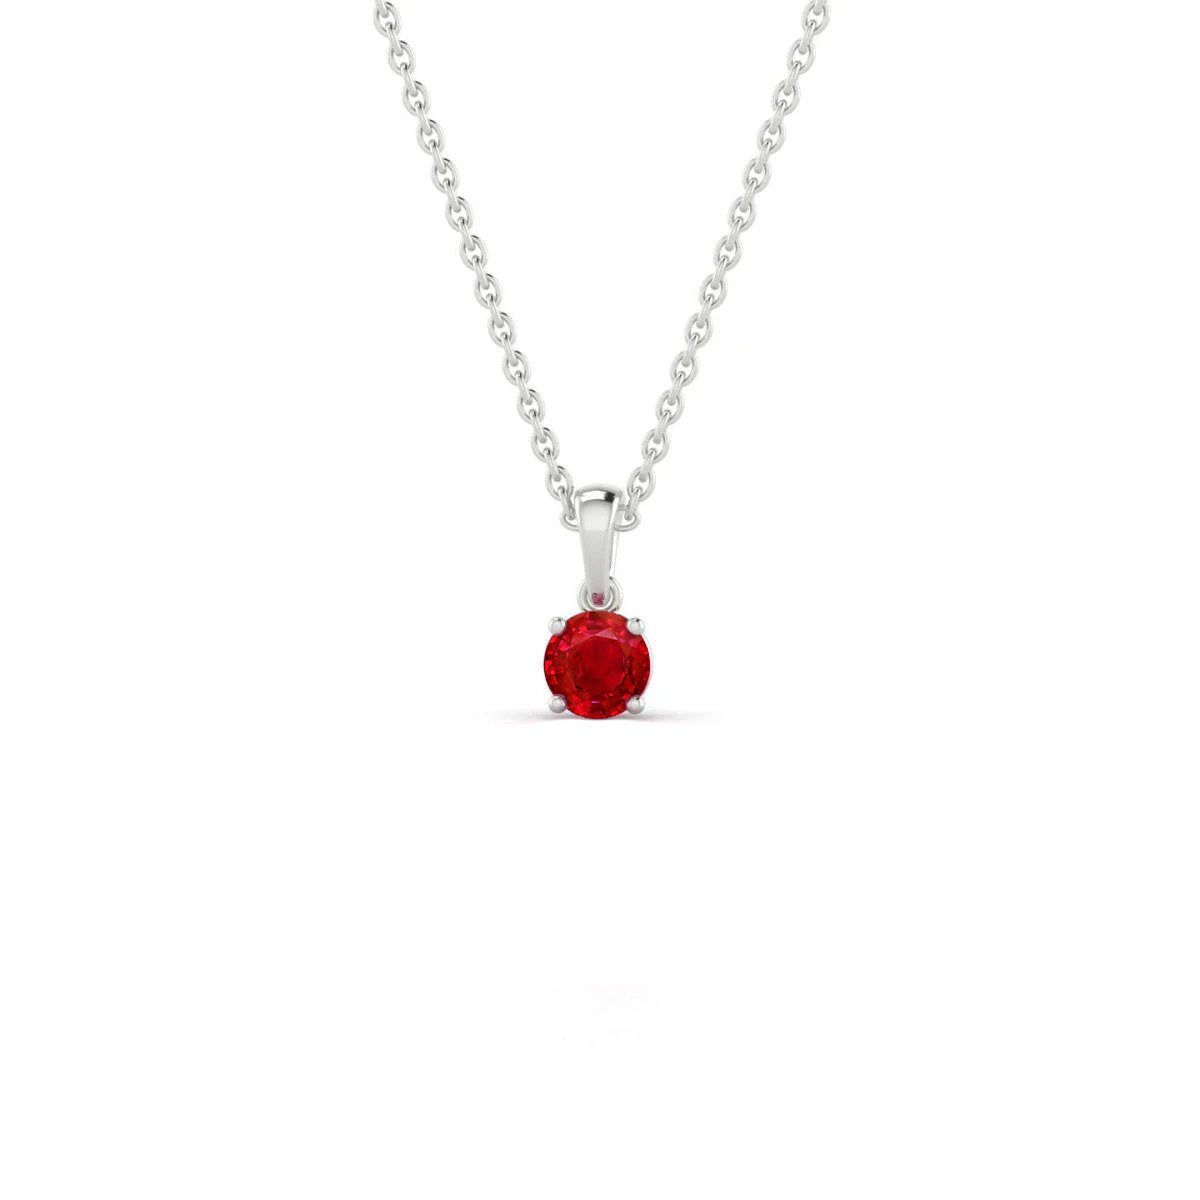 Solitaire 3 Ct. Red Ruby Pendant Necklace White God 14K